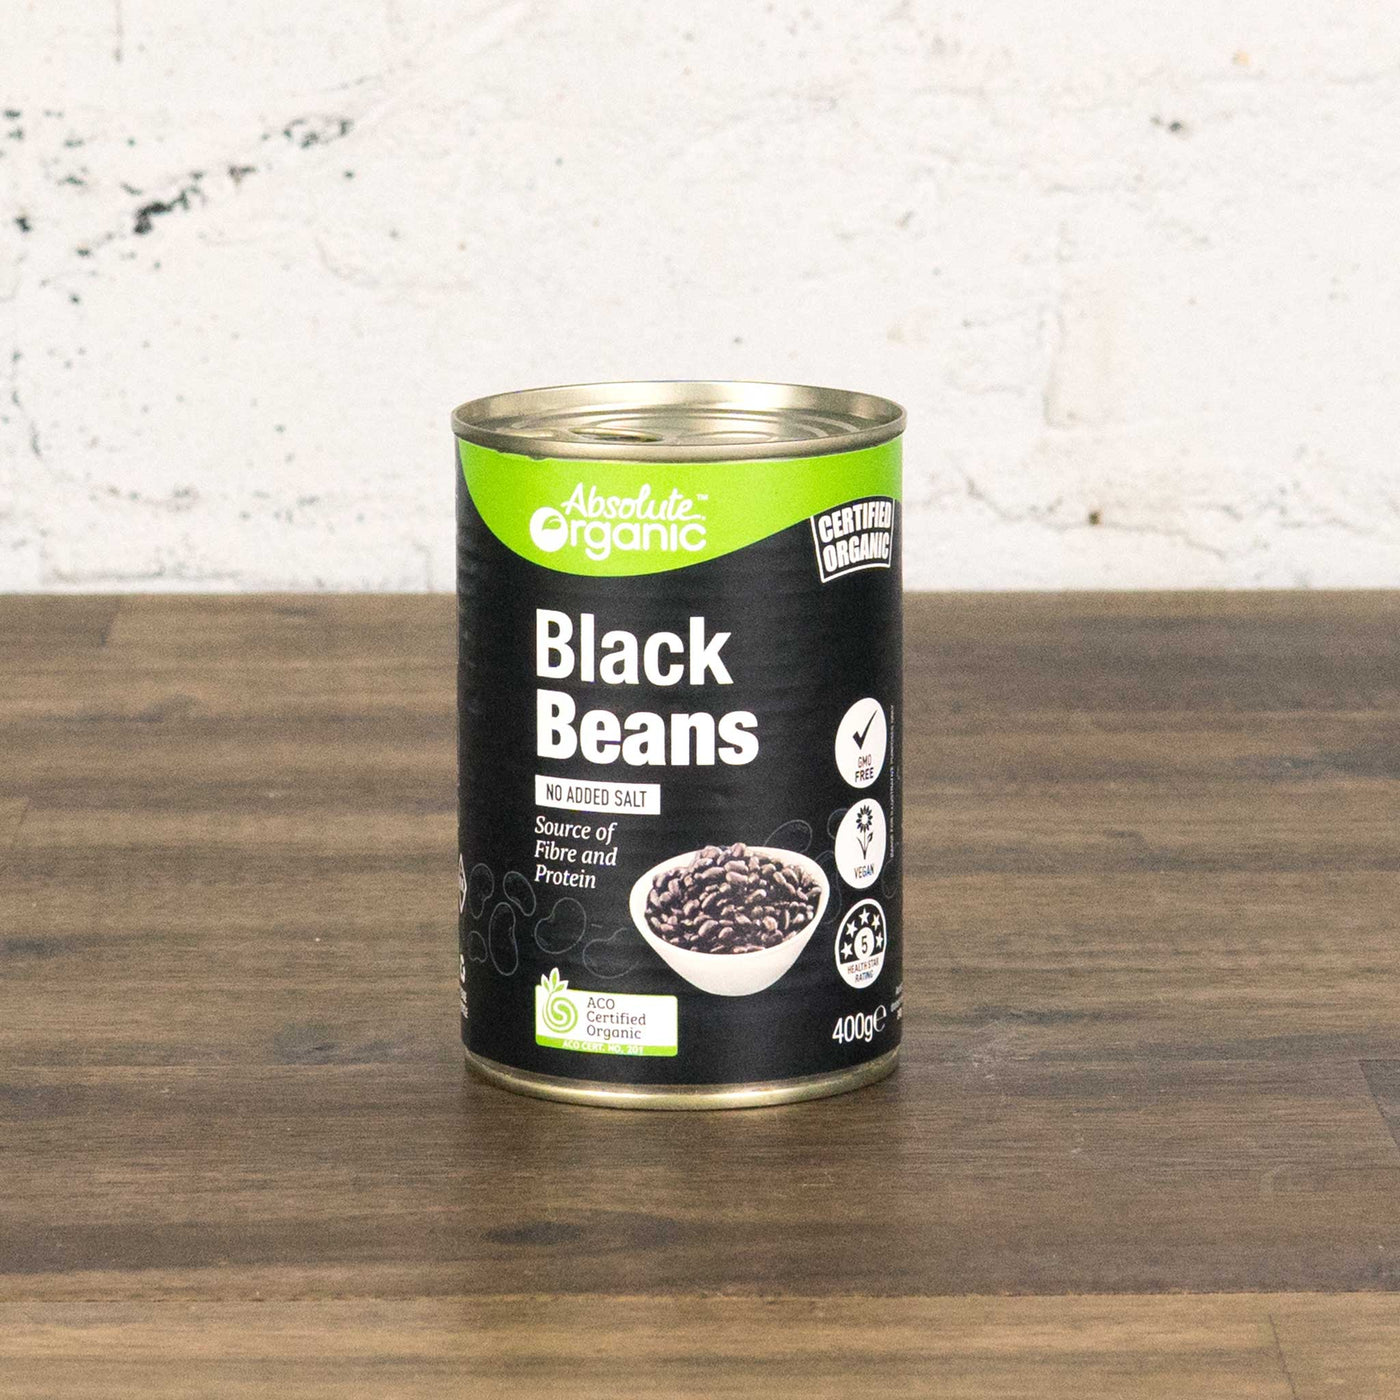 Absolute Organics Black Beans Canned